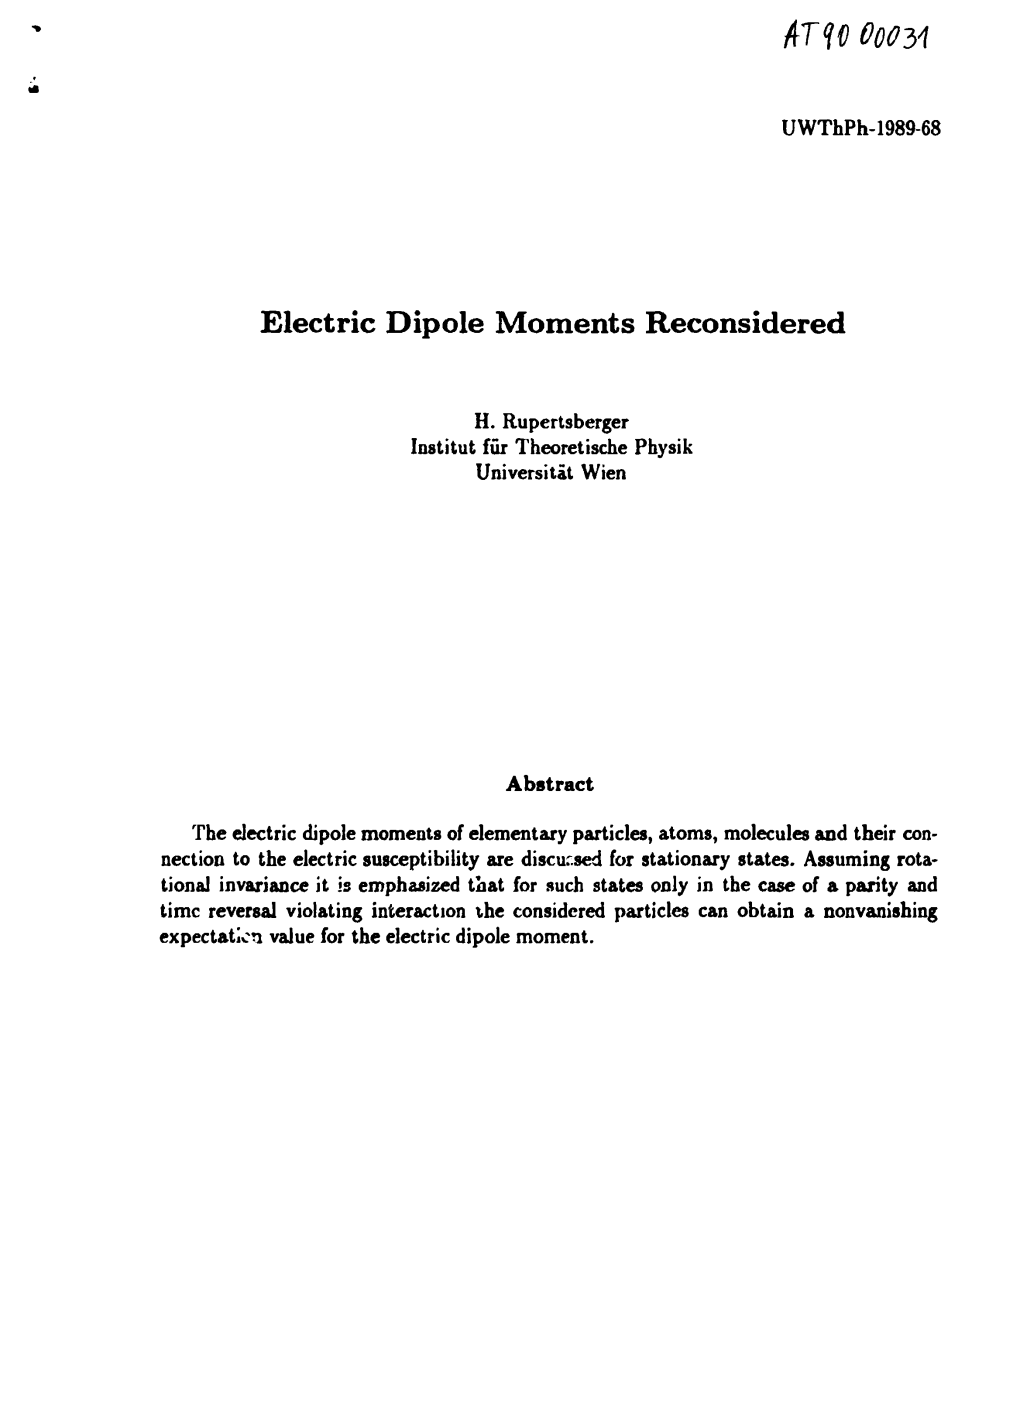 Electric Dipole Moments Reconsidered